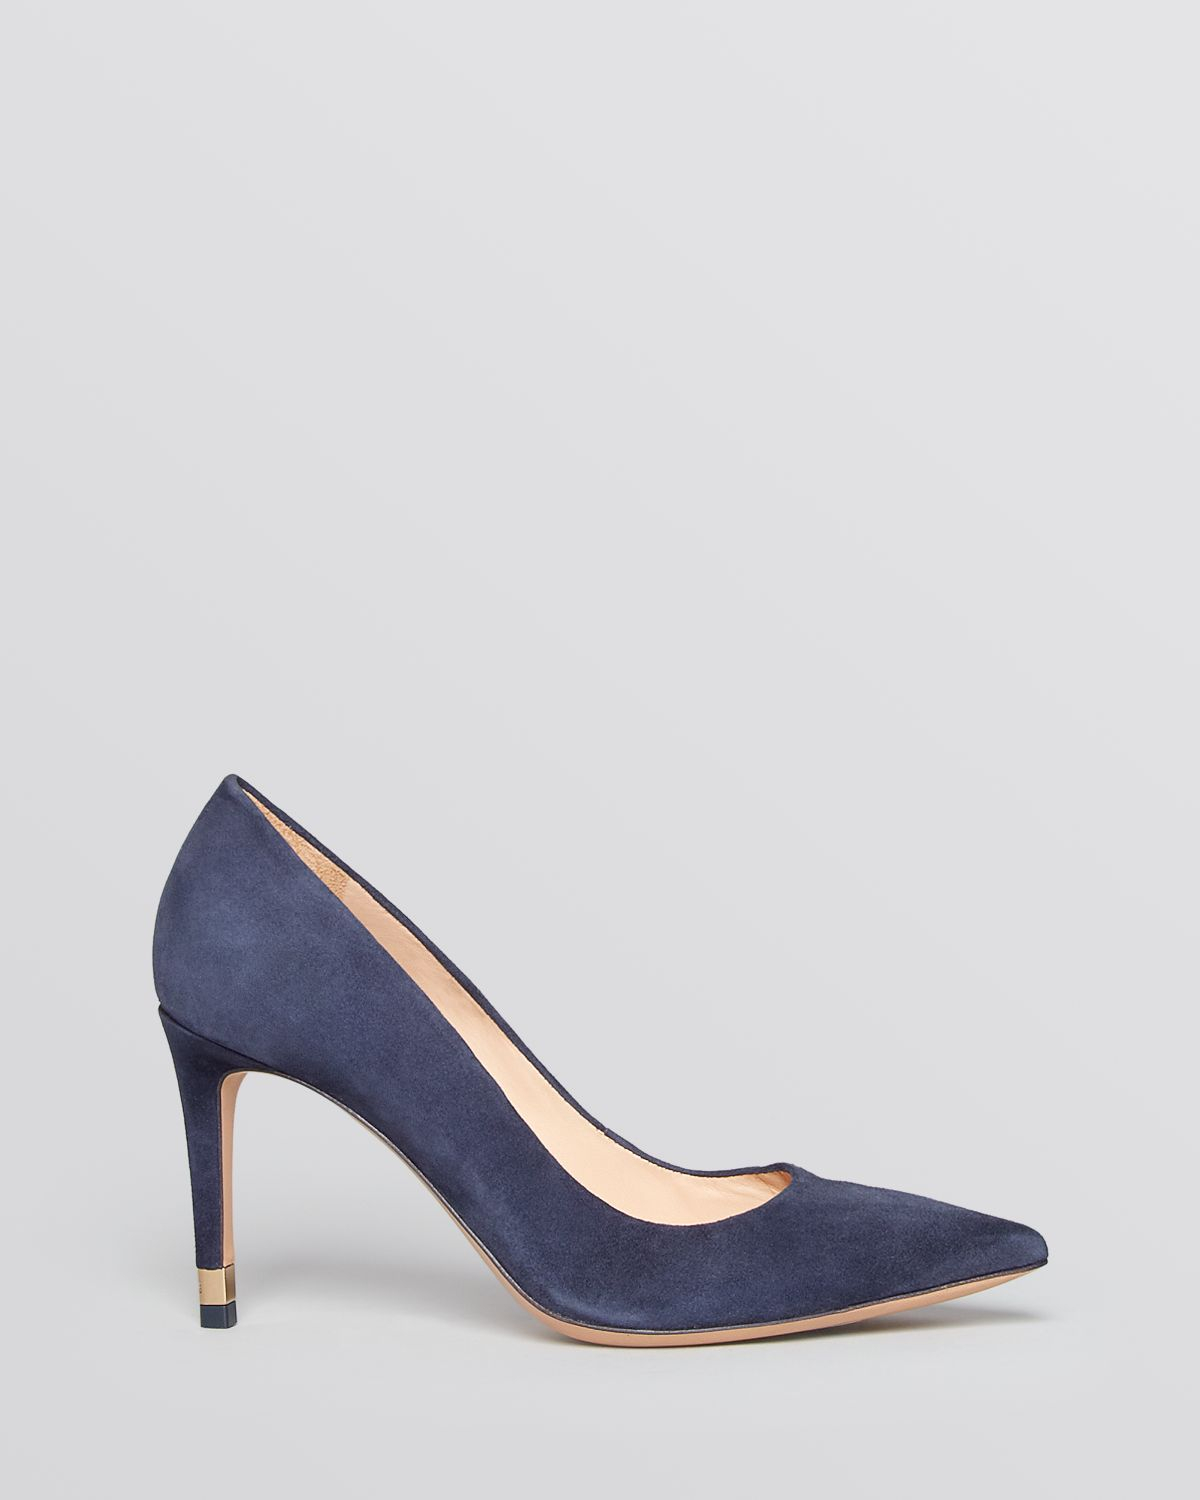 Tory Burch Pointed Toe Pumps - Greenwich High Heel in Blue | Lyst